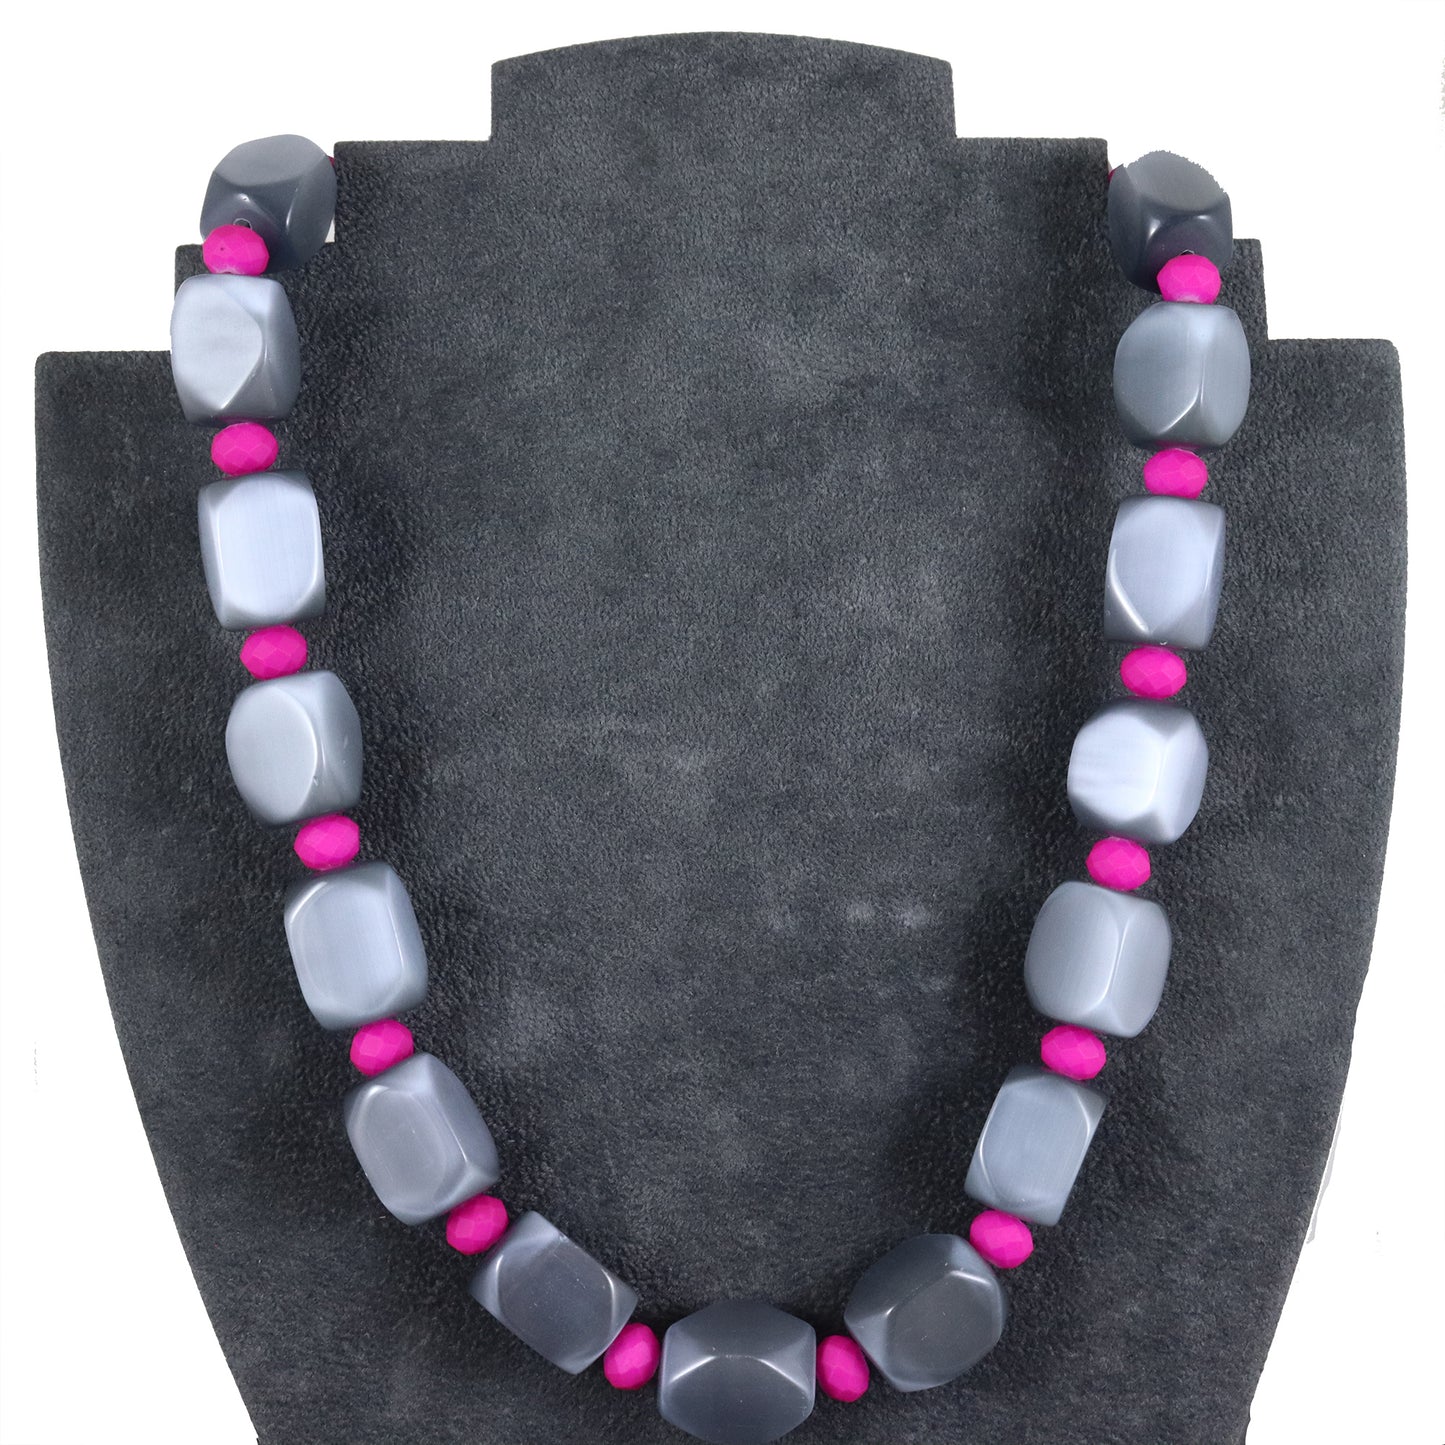 Grey and Fuchsia Pink Chunky Necklace